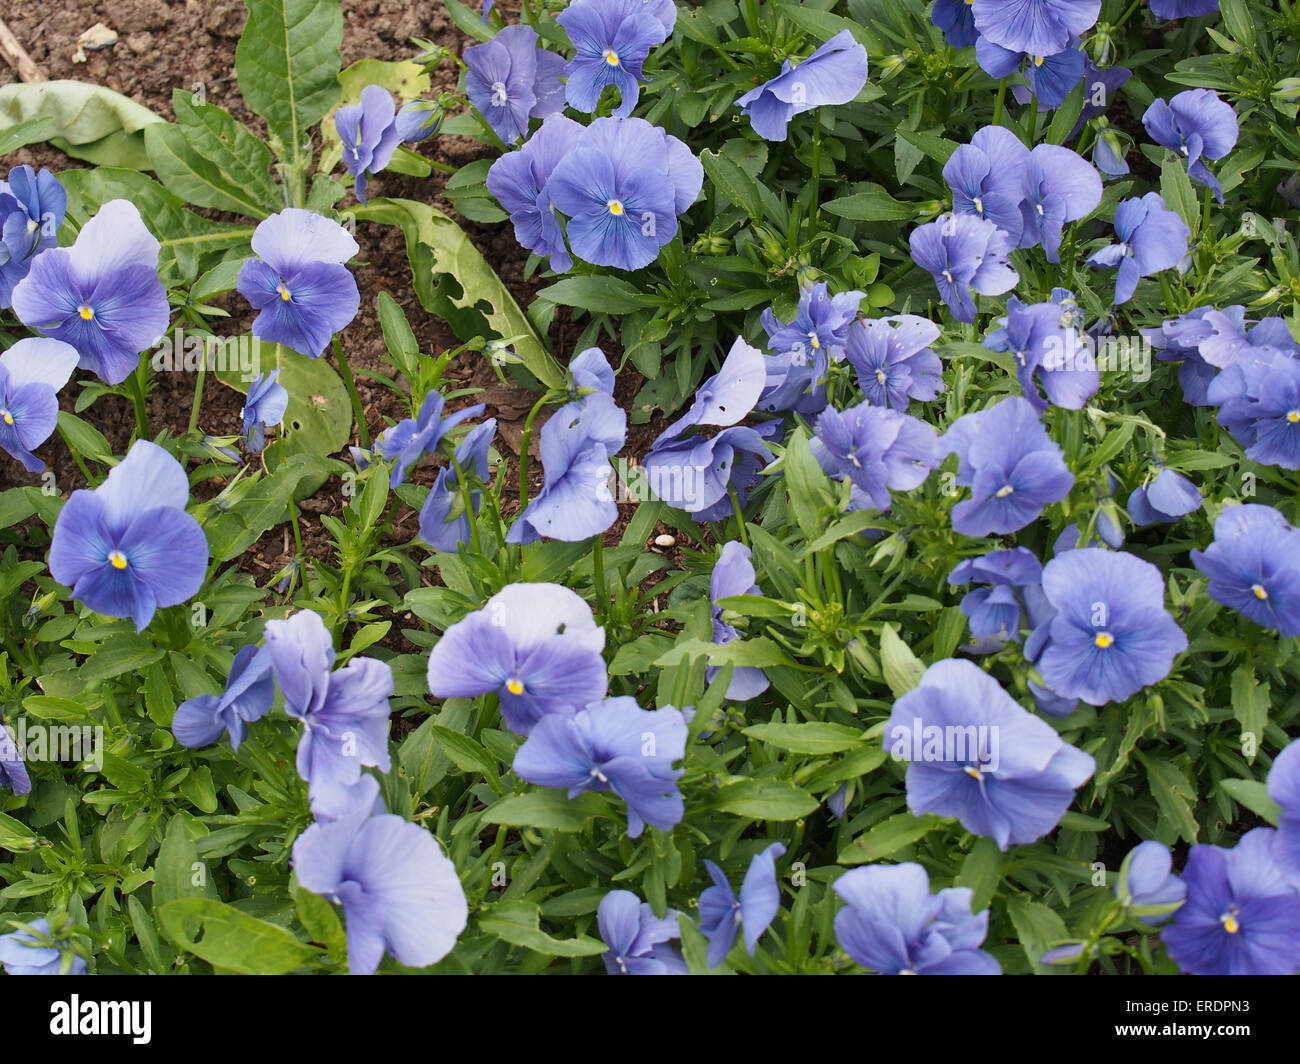 Group of flowering blue pansies planted in a garden Stock Photo